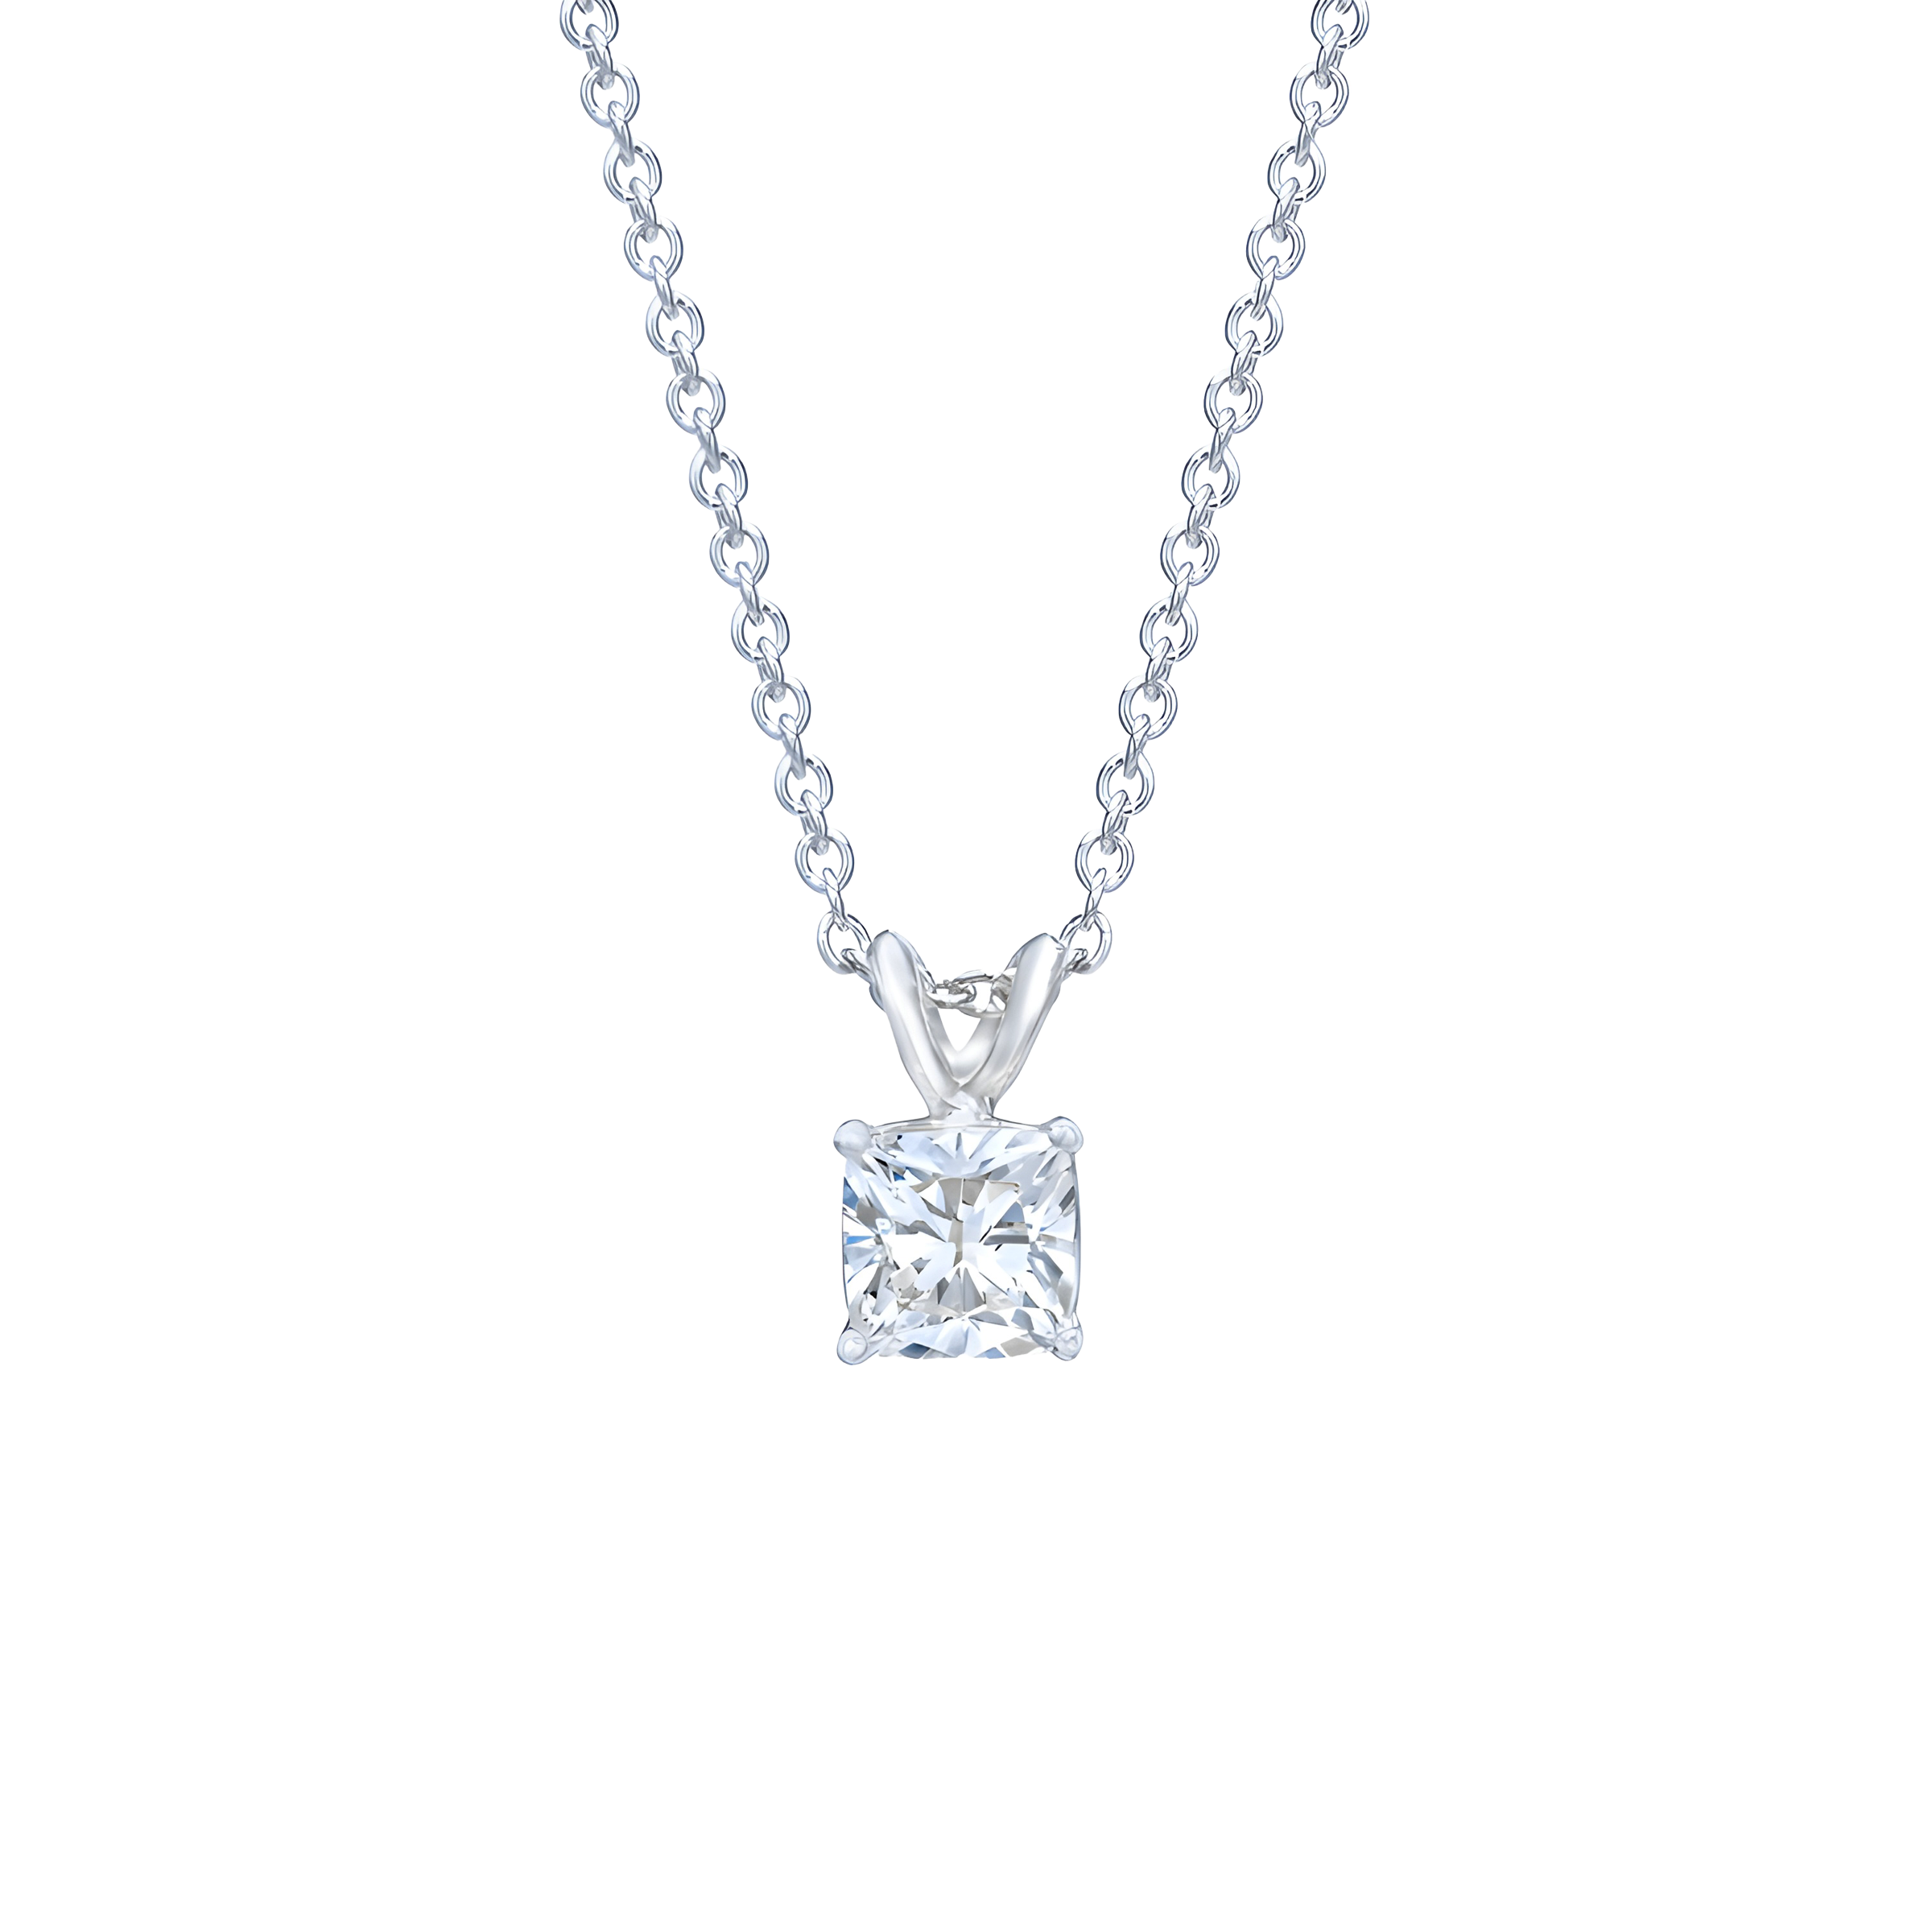 Cushion Cut Solitaire Diamond Pendent Necklace in 18k White Gold